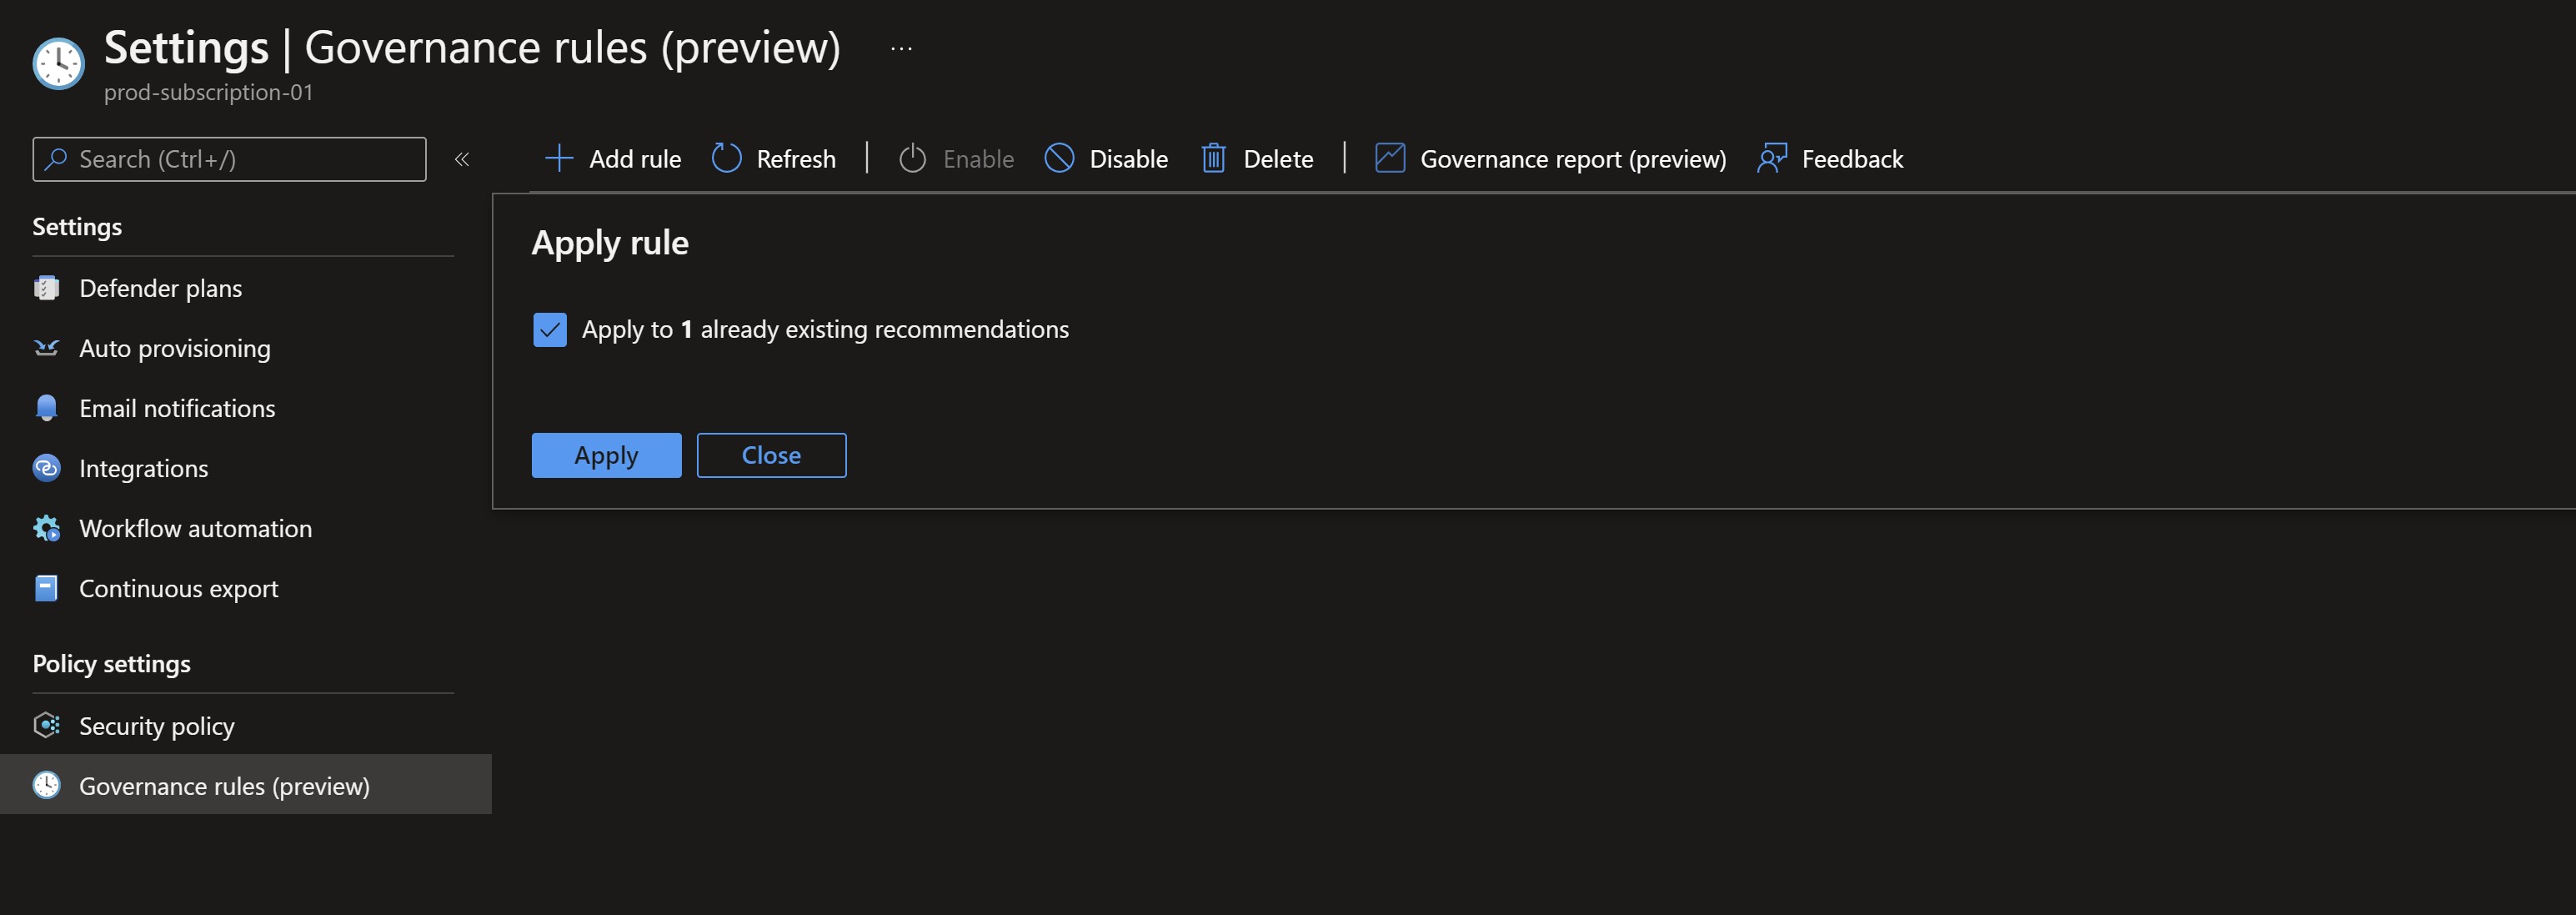 Screenshot showing the governance rule popup to apply to existing recommendations